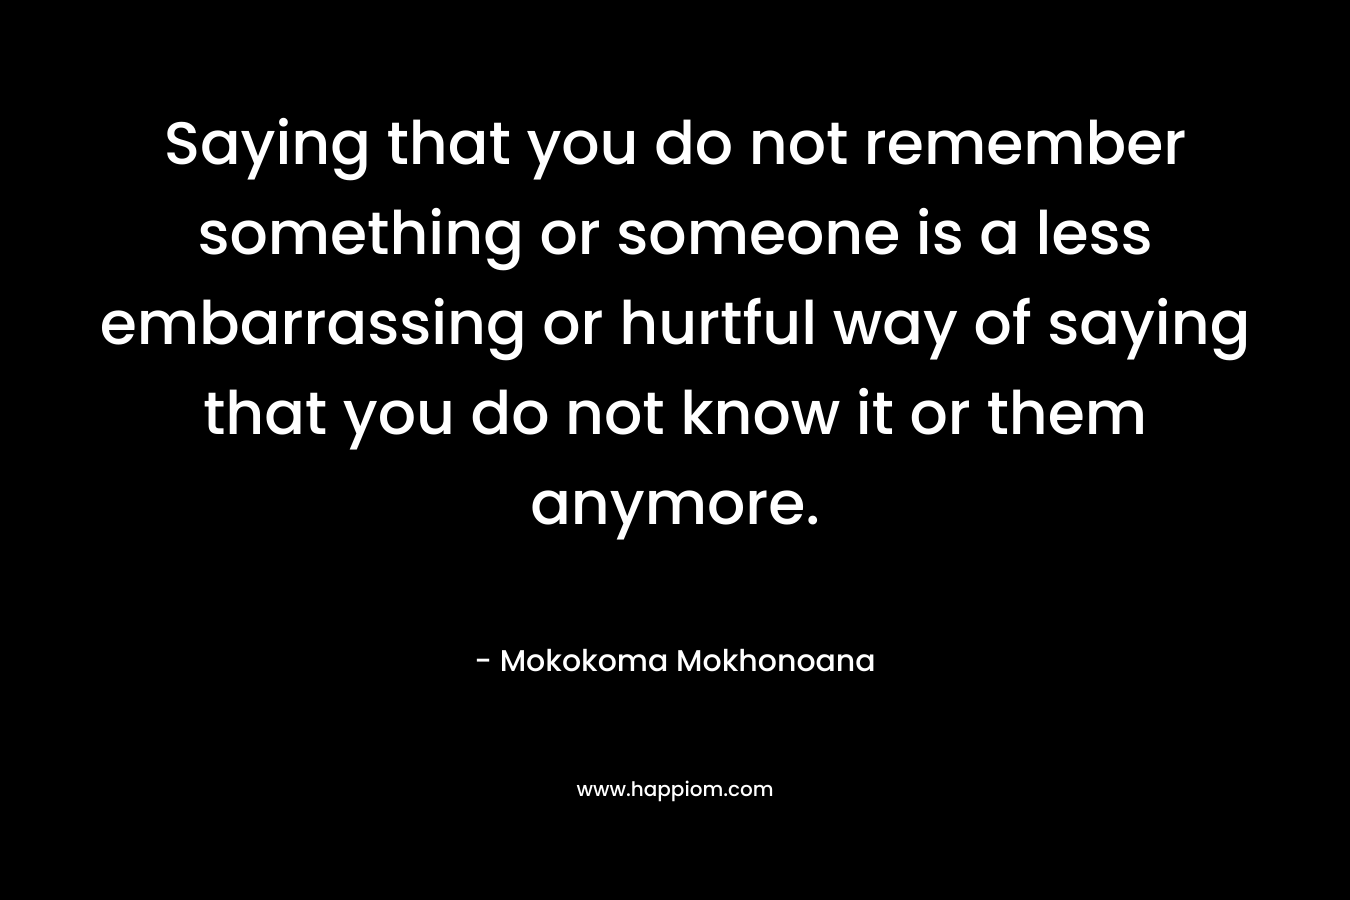 Saying that you do not remember something or someone is a less embarrassing or hurtful way of saying that you do not know it or them anymore.